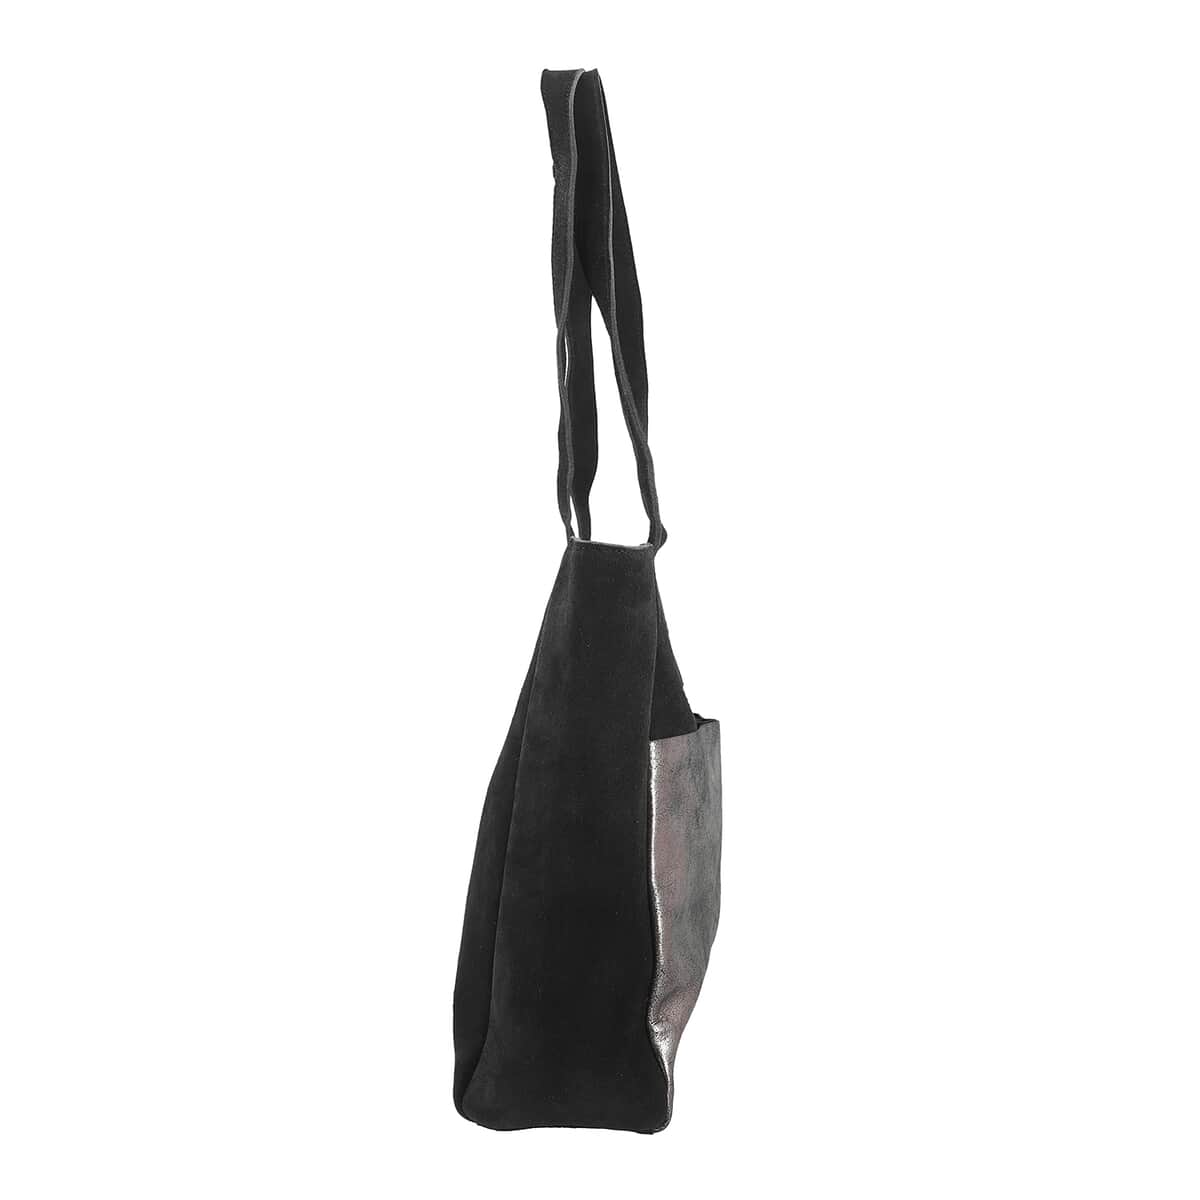 "100% Genuine Leather Tote Bag Color:Black Size: 11.5Lx13Hx4W INCH" image number 5